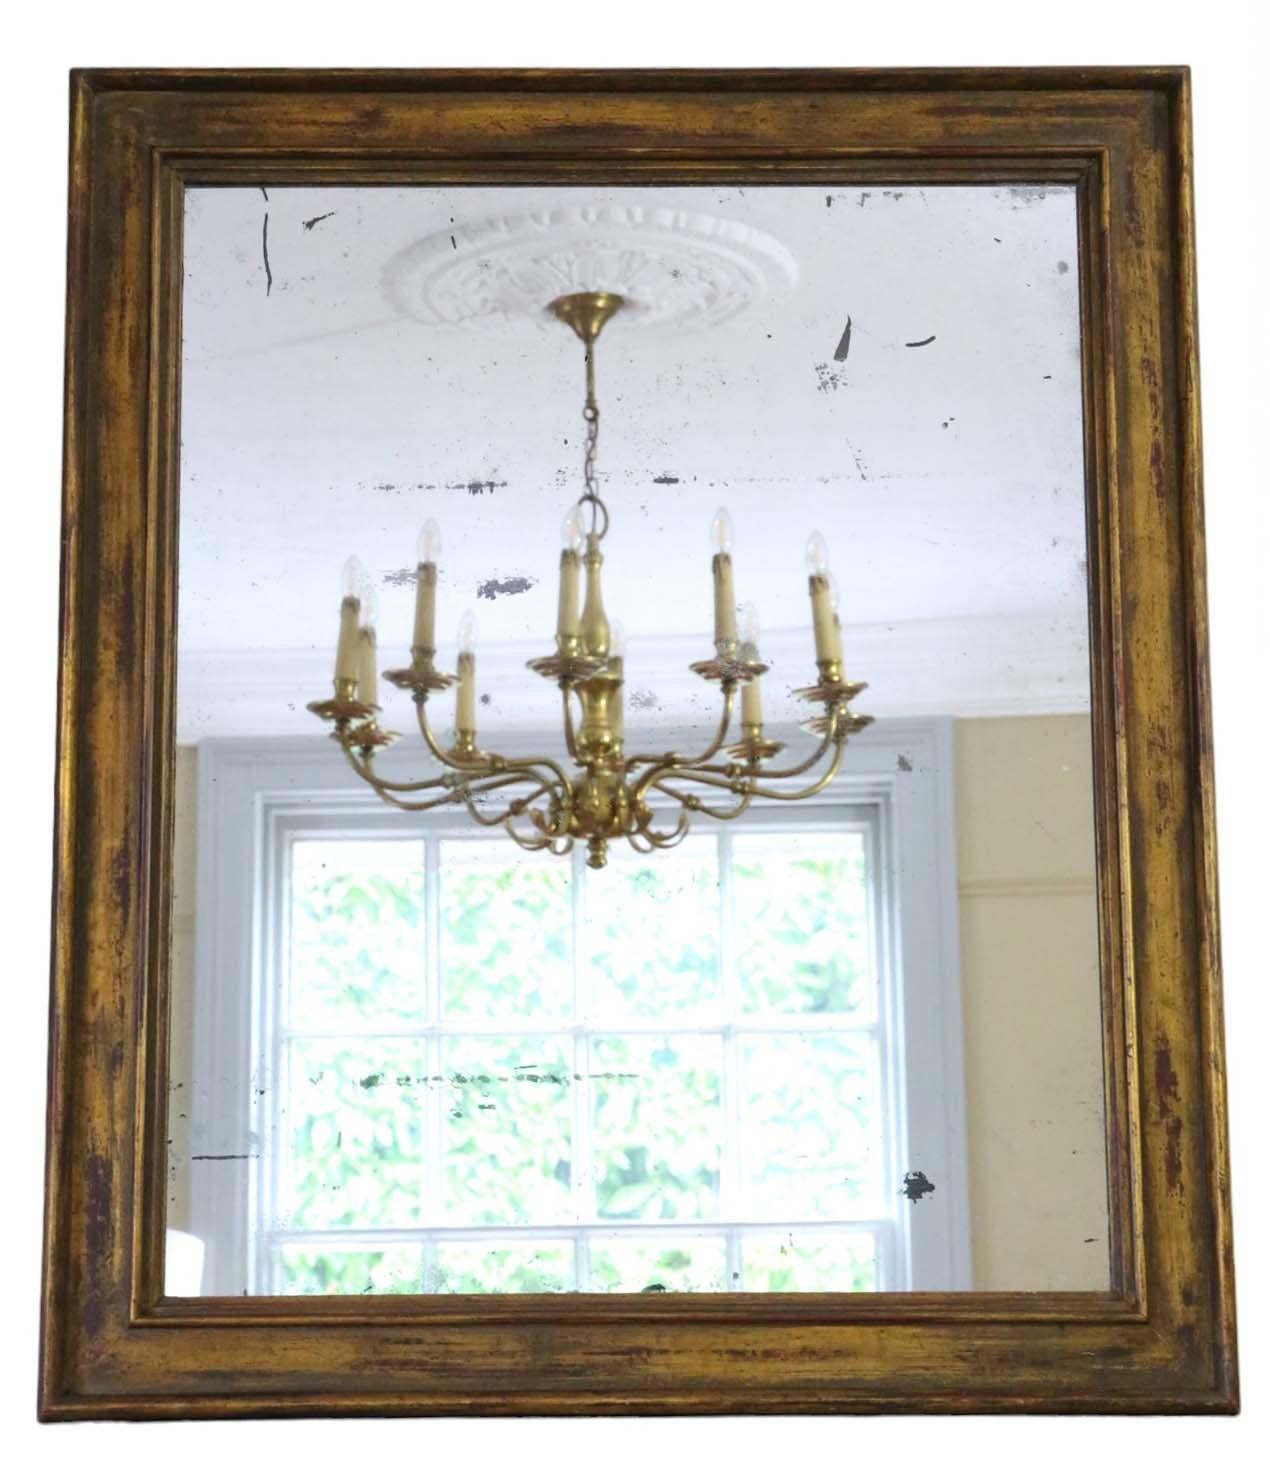 Antique large gilt overmantle wall mirror from the 19th Century, boasting fine quality craftsmanship.

This mirror captivates with its simple yet striking design, adding character to any suitable space. The frame is sturdy and free from loose joints